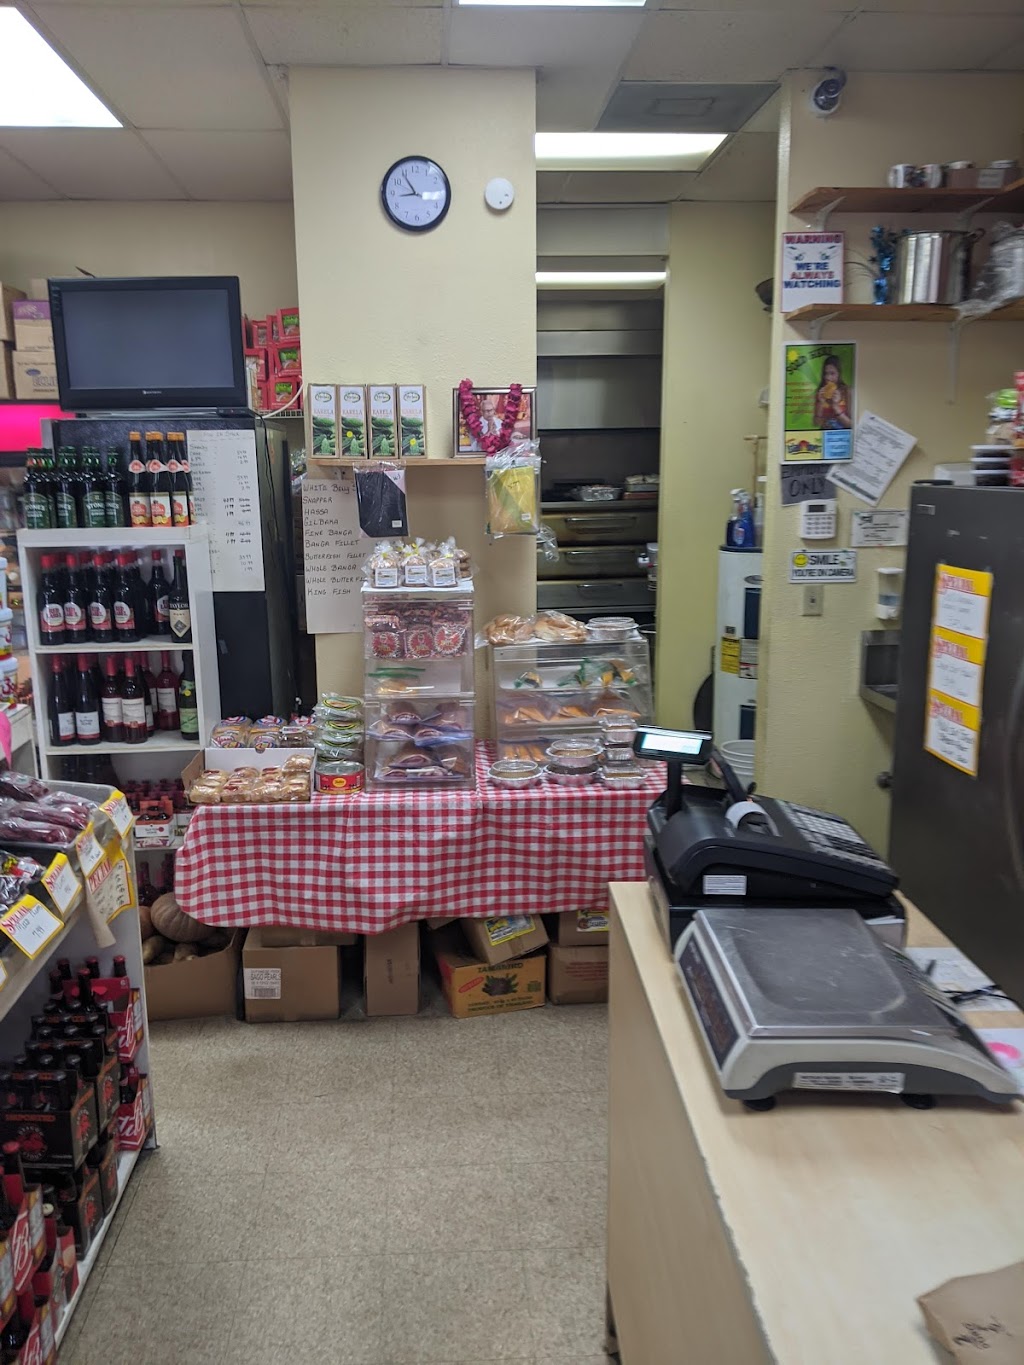 Sayroos Bakery & Grocery | 2028 S 50th St, Tampa, FL 33619 | Phone: (813) 248-6402